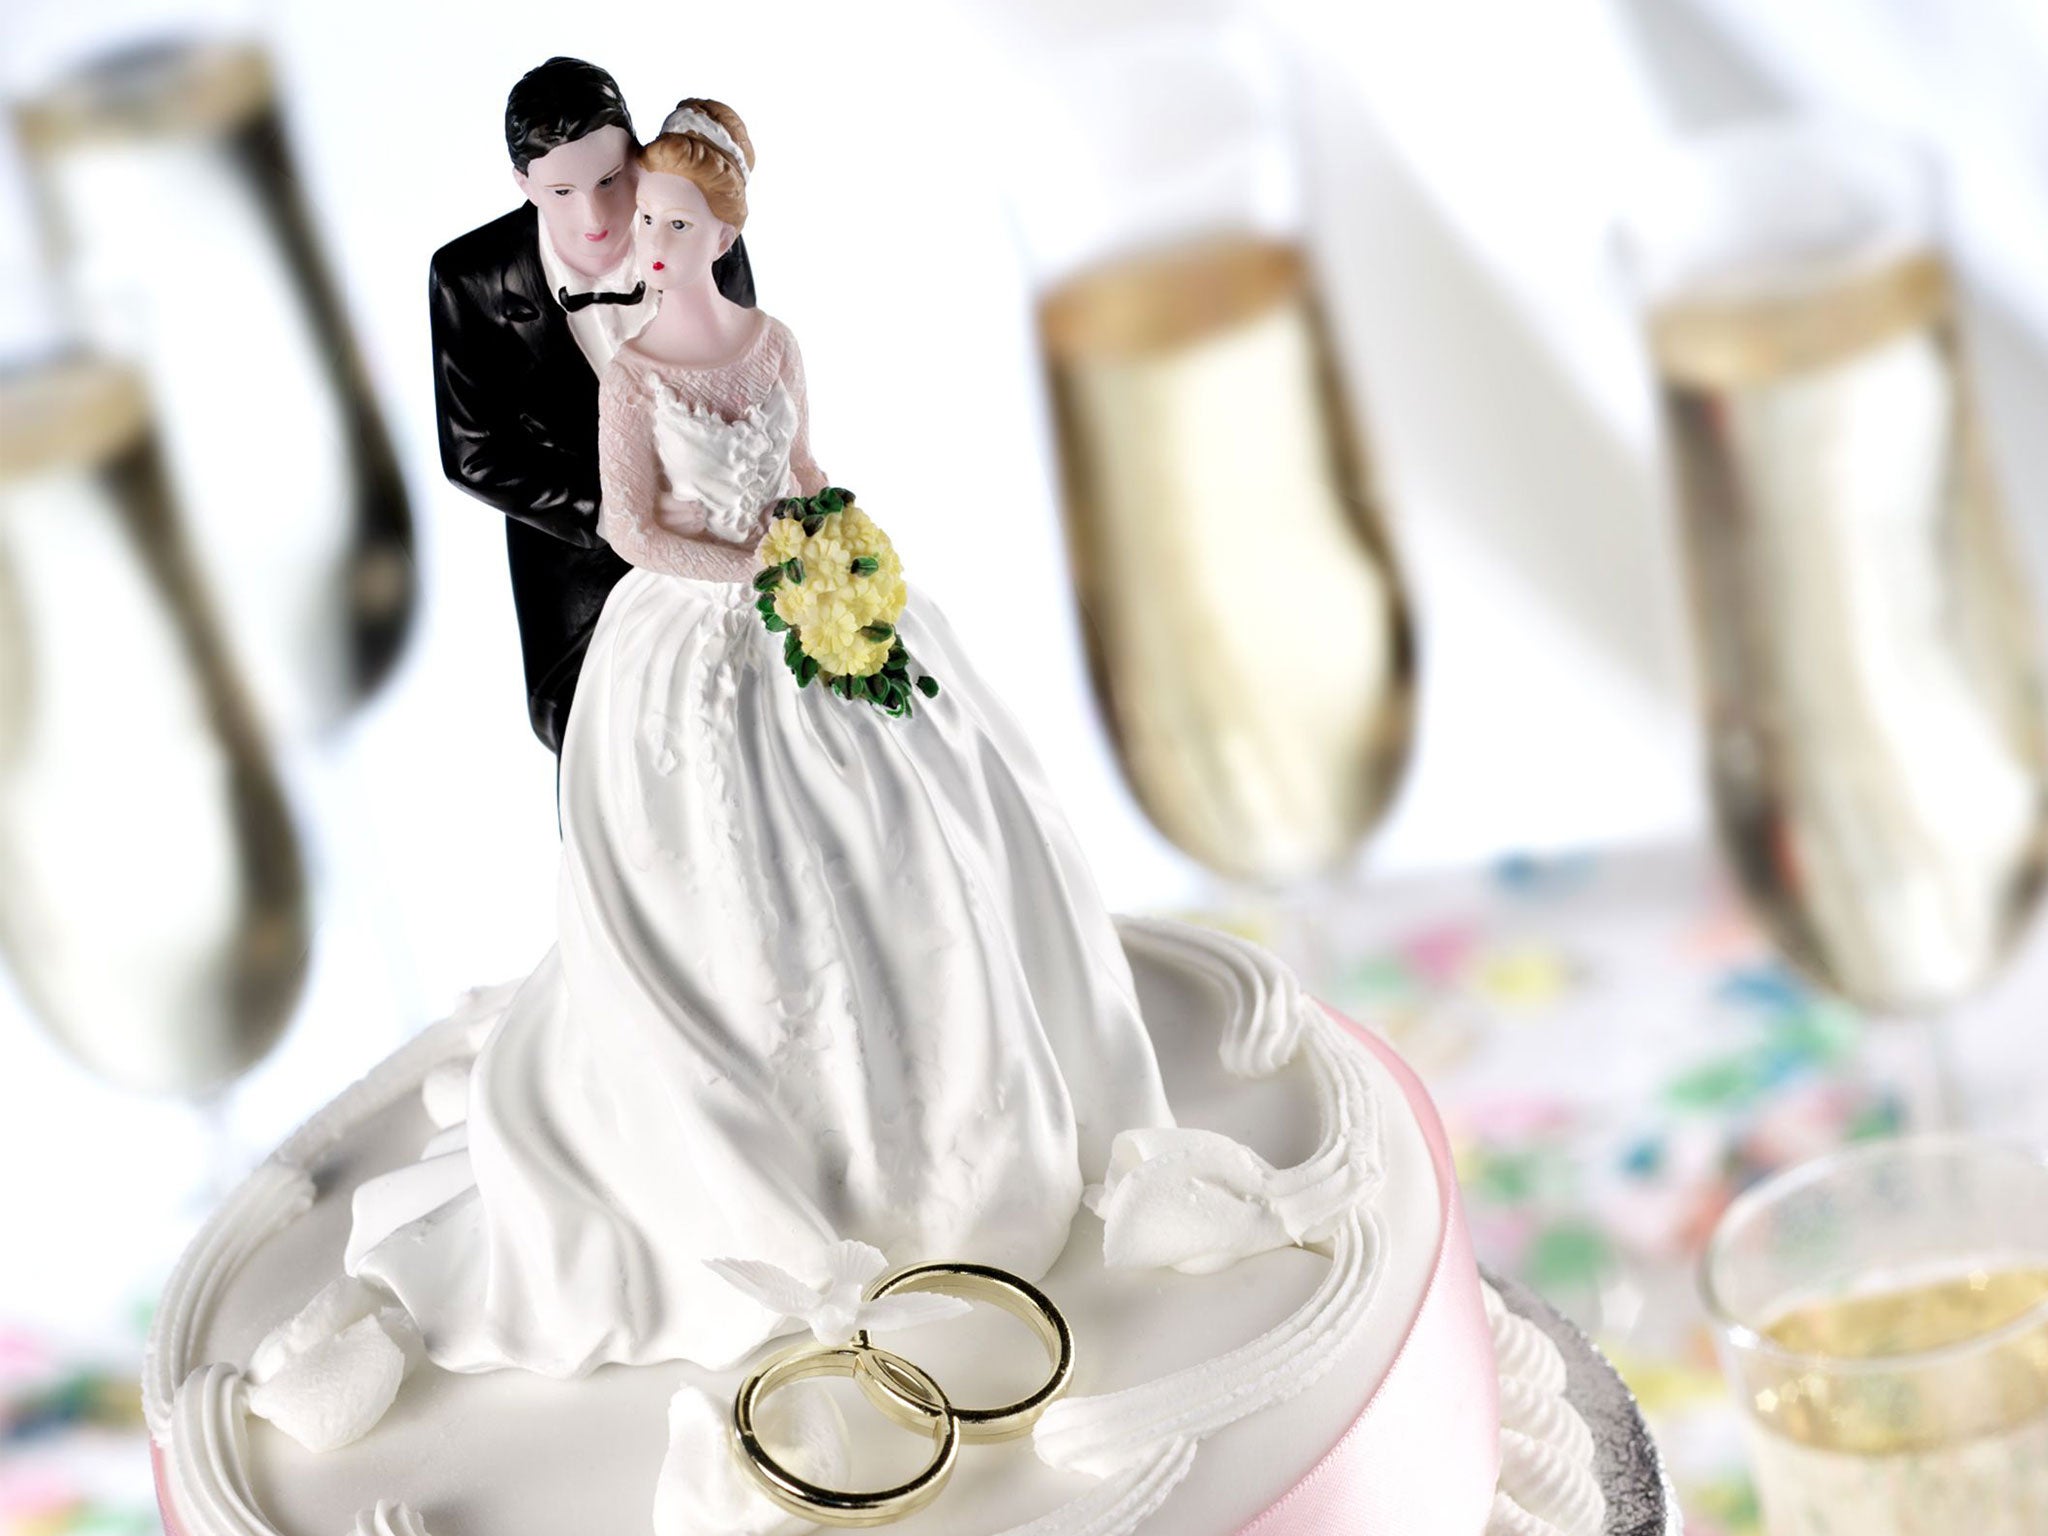 Middle-aged women who had never wed had almost same chance of developing a combination of diabetes, high blood pressure and obesity, known as metabolic syndrome, as their married counterparts